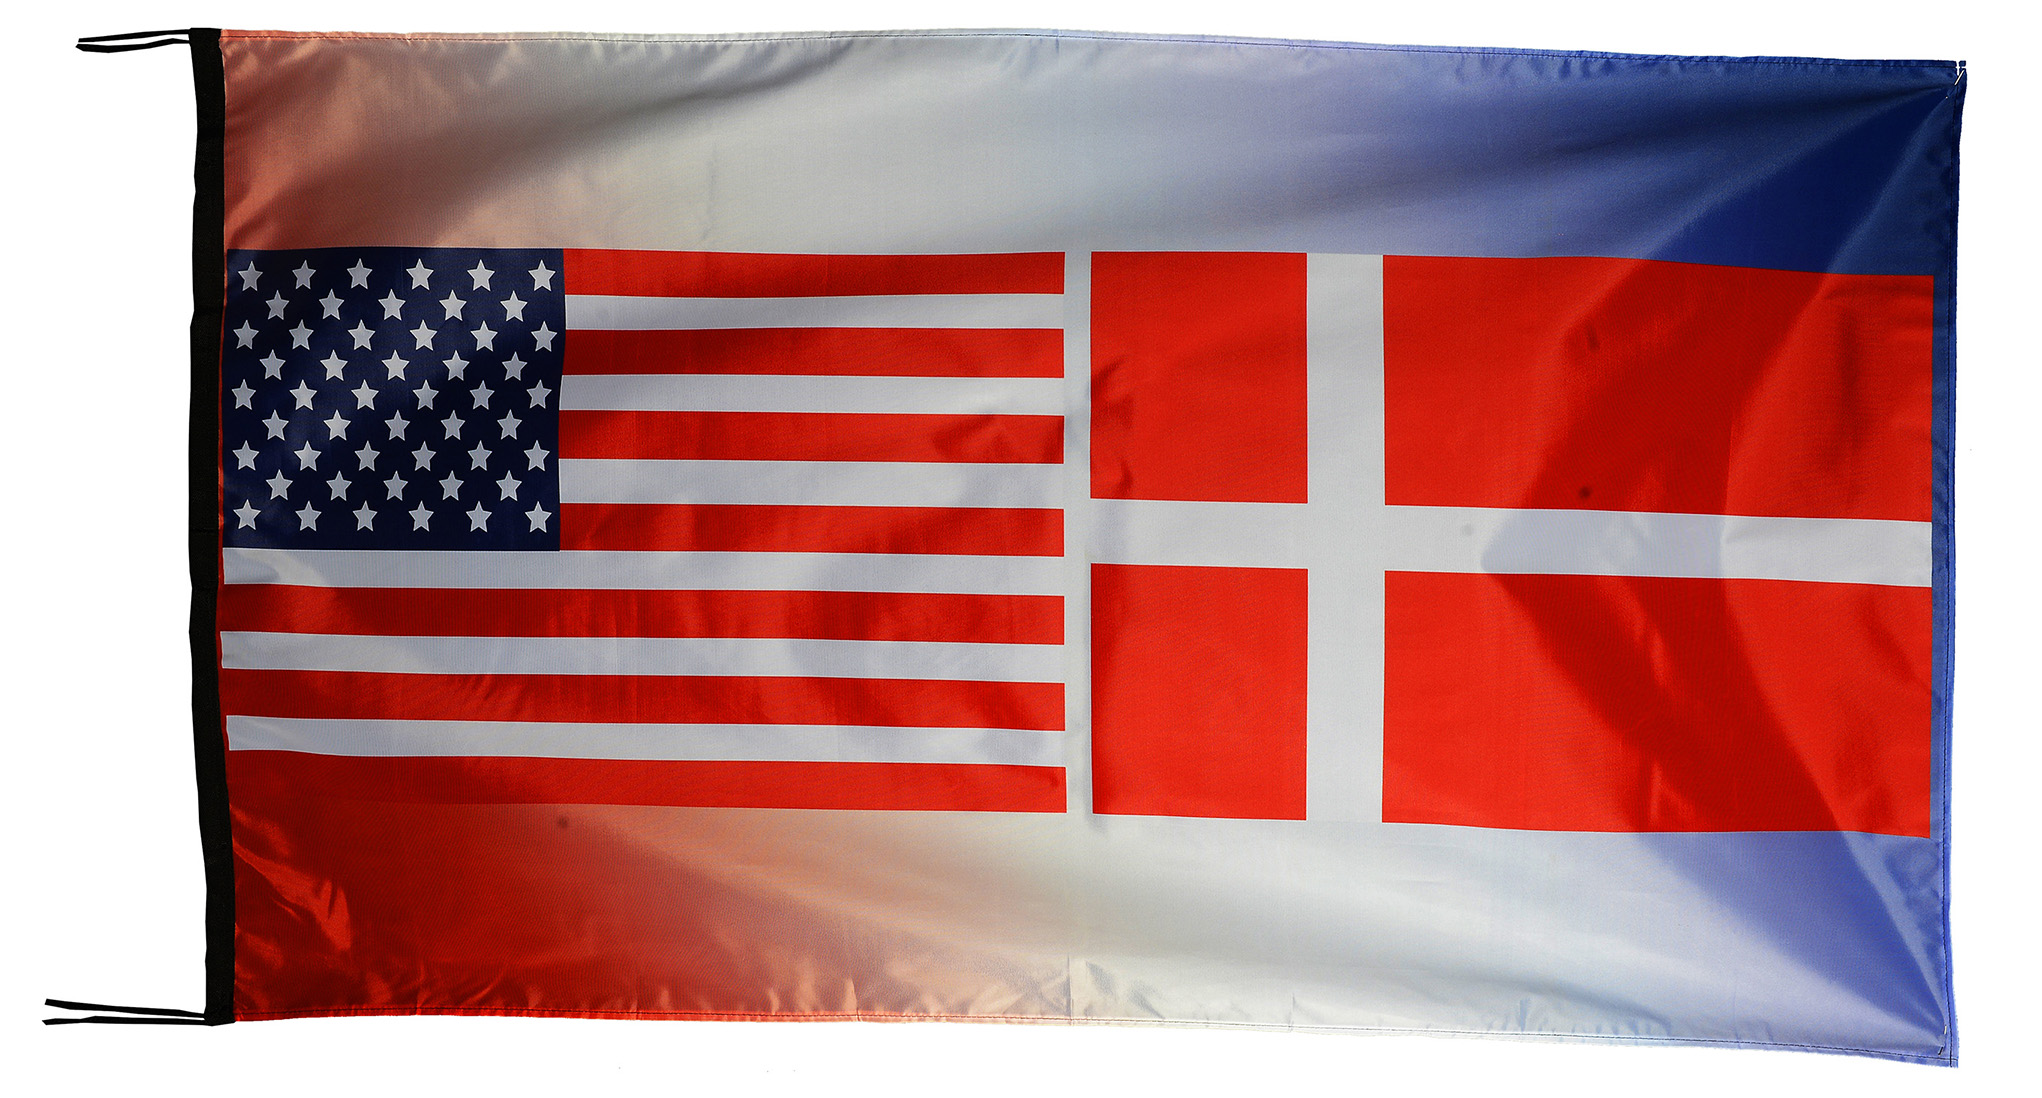 Flag  142 USA / US Country / United States Of America and Denmark (Danish Flag) / Patriotic / Pride Hybrid Weather-Resistant Polyester Outdoor Flag Landscape Banner / Vivid Colors / 3 X 5 FT (150 x 90cm) International Flags for Sale